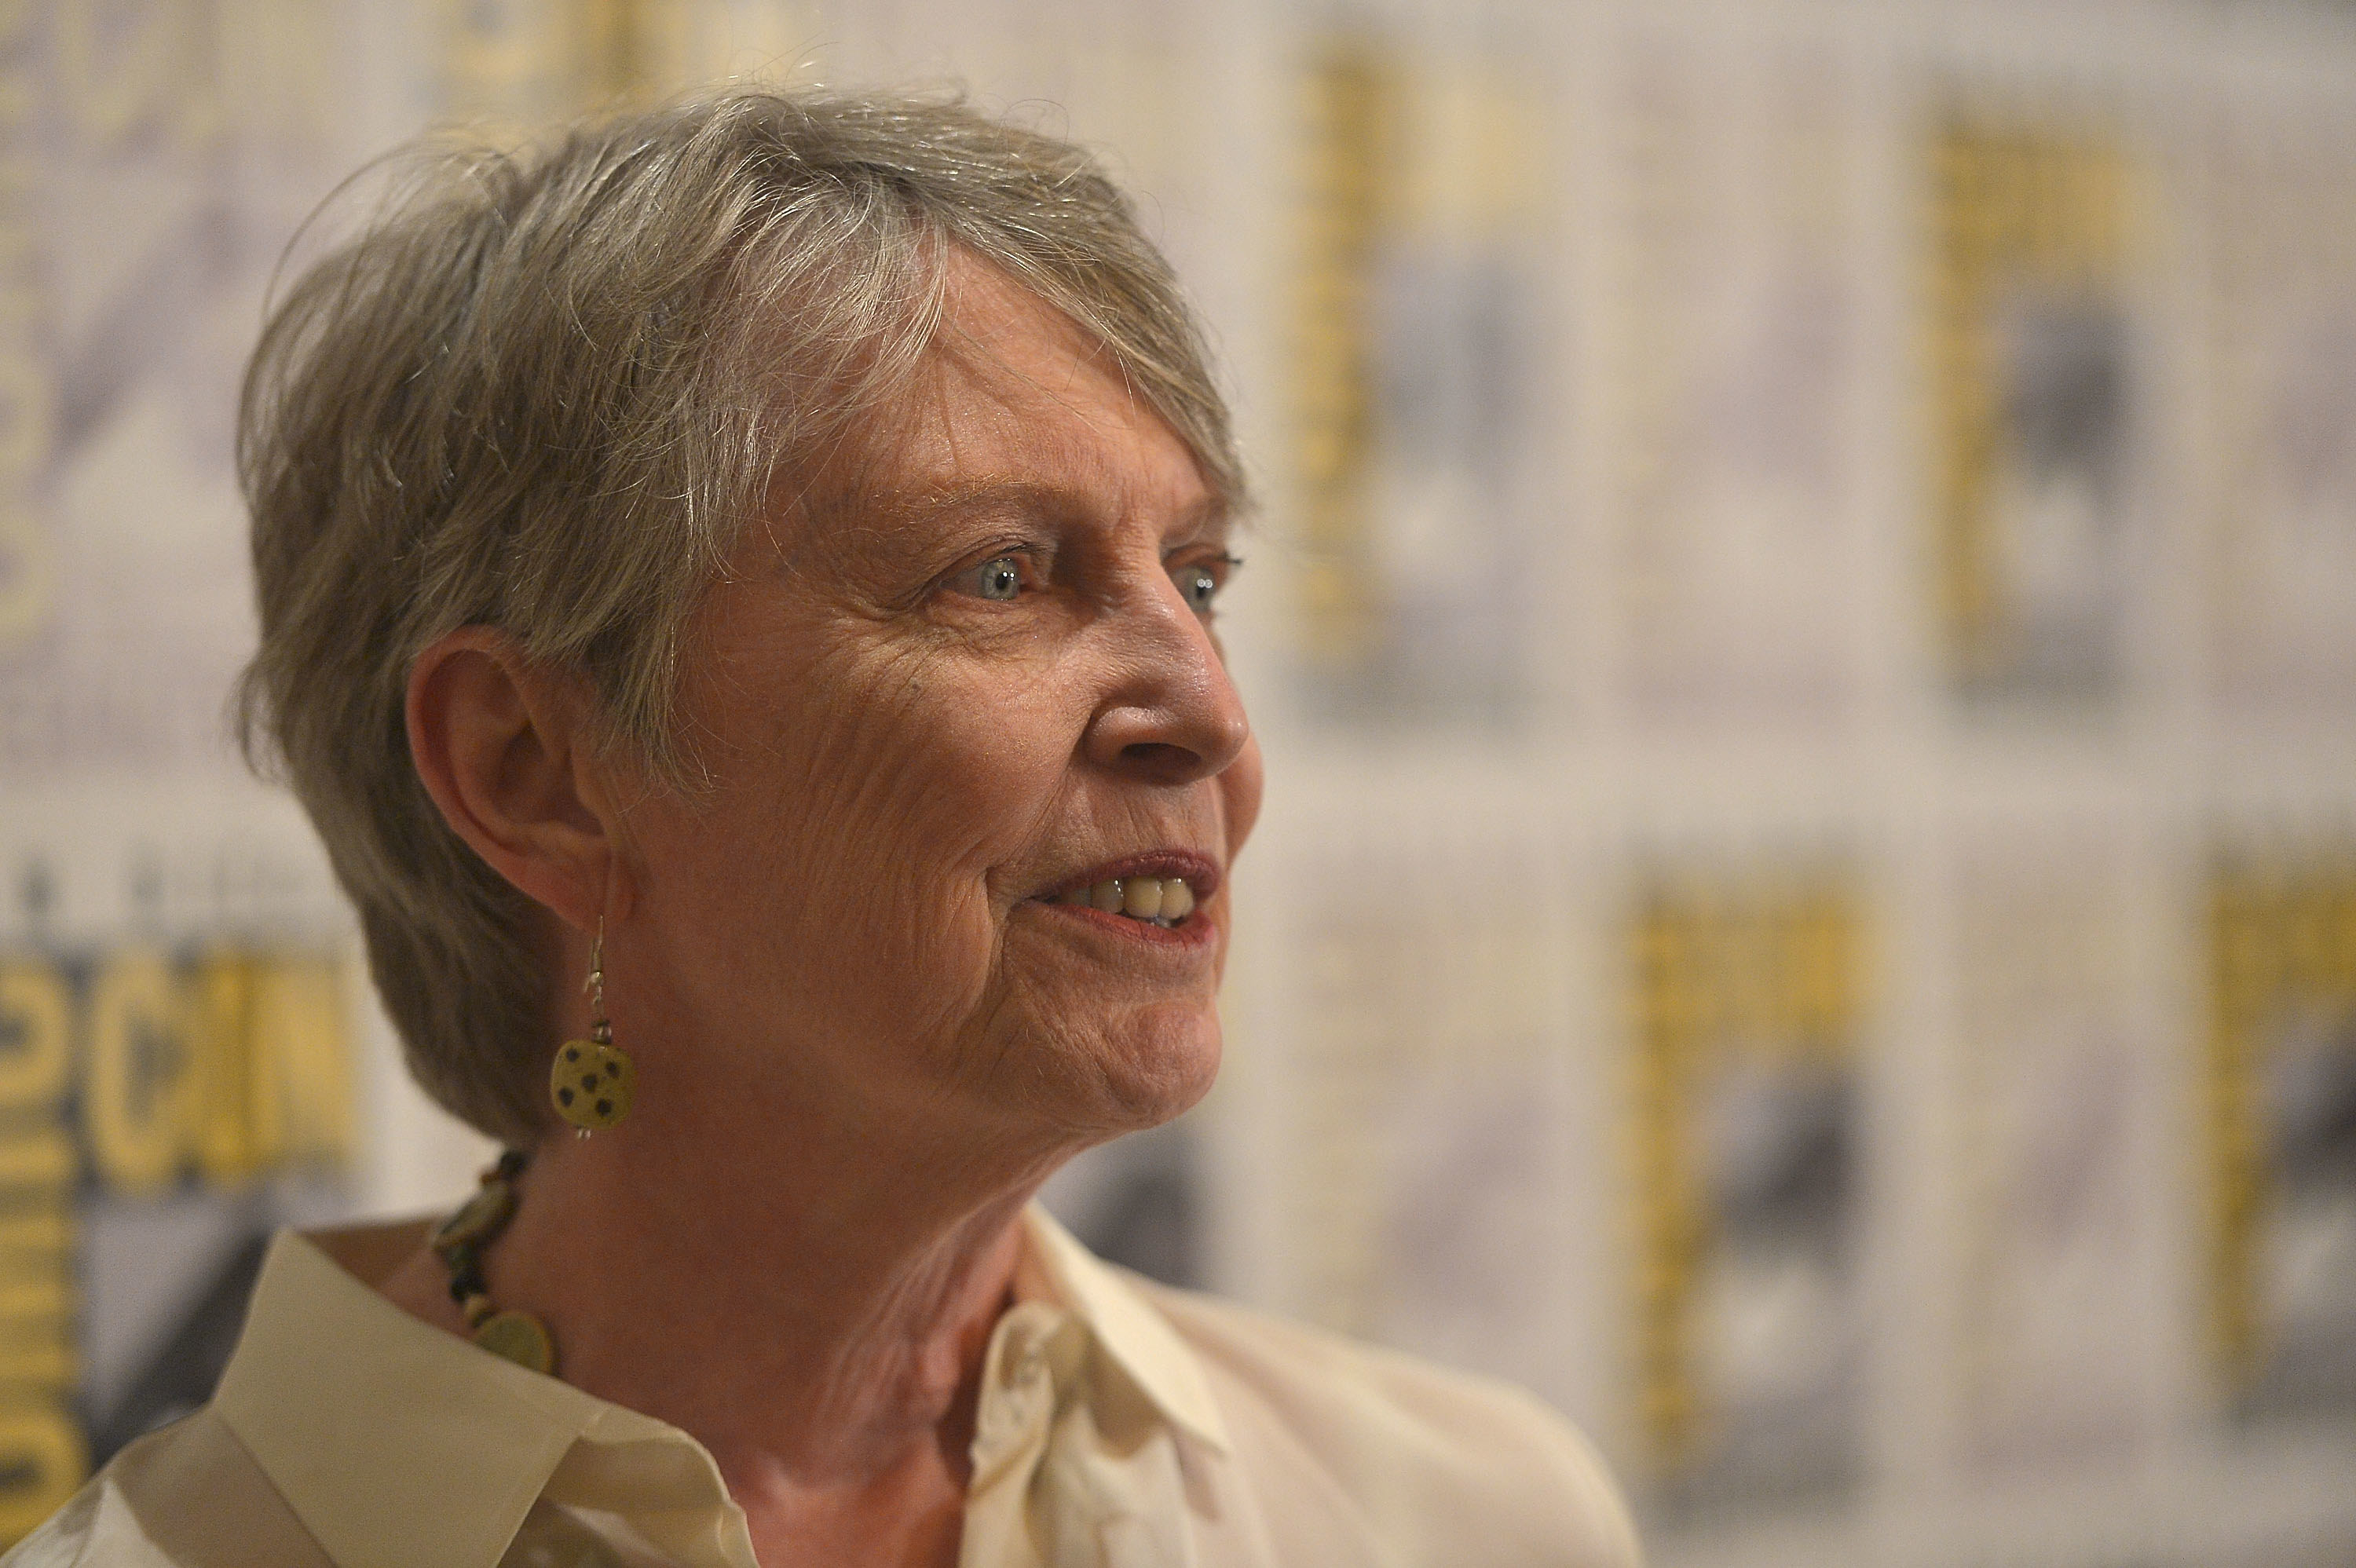 Lois Lowry posing on a red carpet